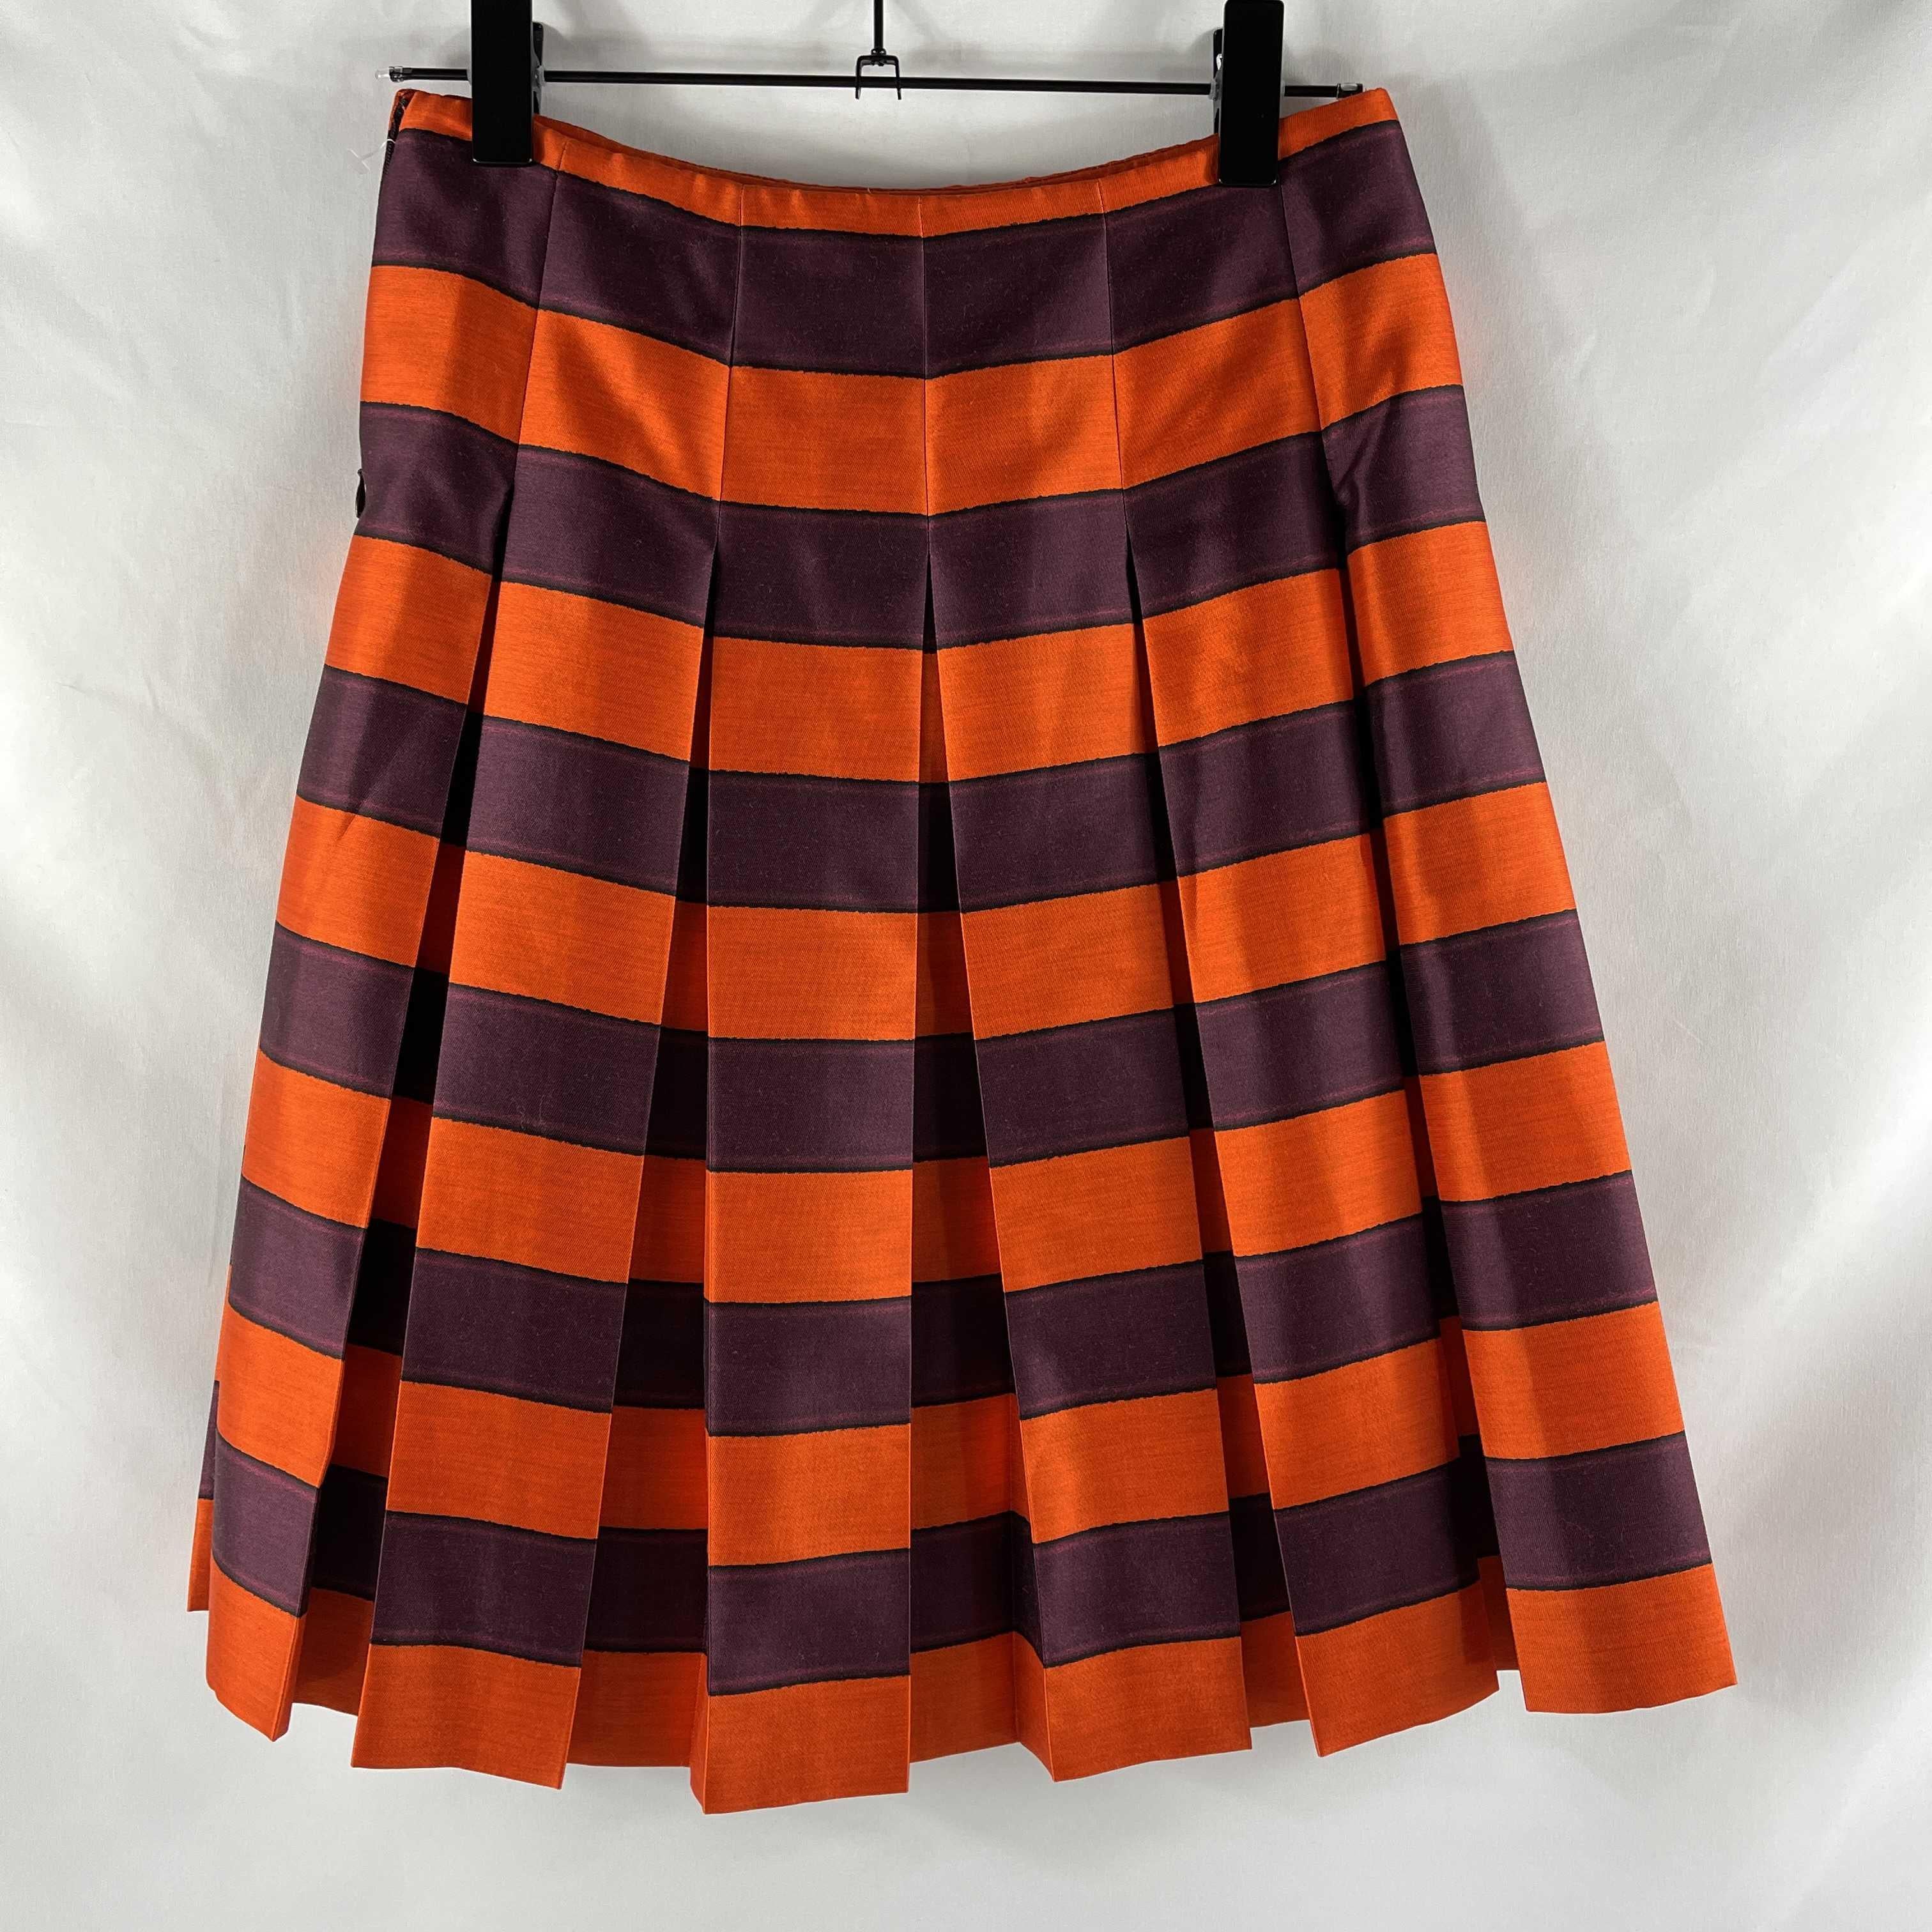 Prada - Pristine - Pleated High-Waisted Striped Mini - Purple, Orange, Black - 38- US 2 - Skirt

Description

This Prada skirt is crafted with a wool and silk blend and is designed with purple, orange, and black stripes.
The skirt is mini length,